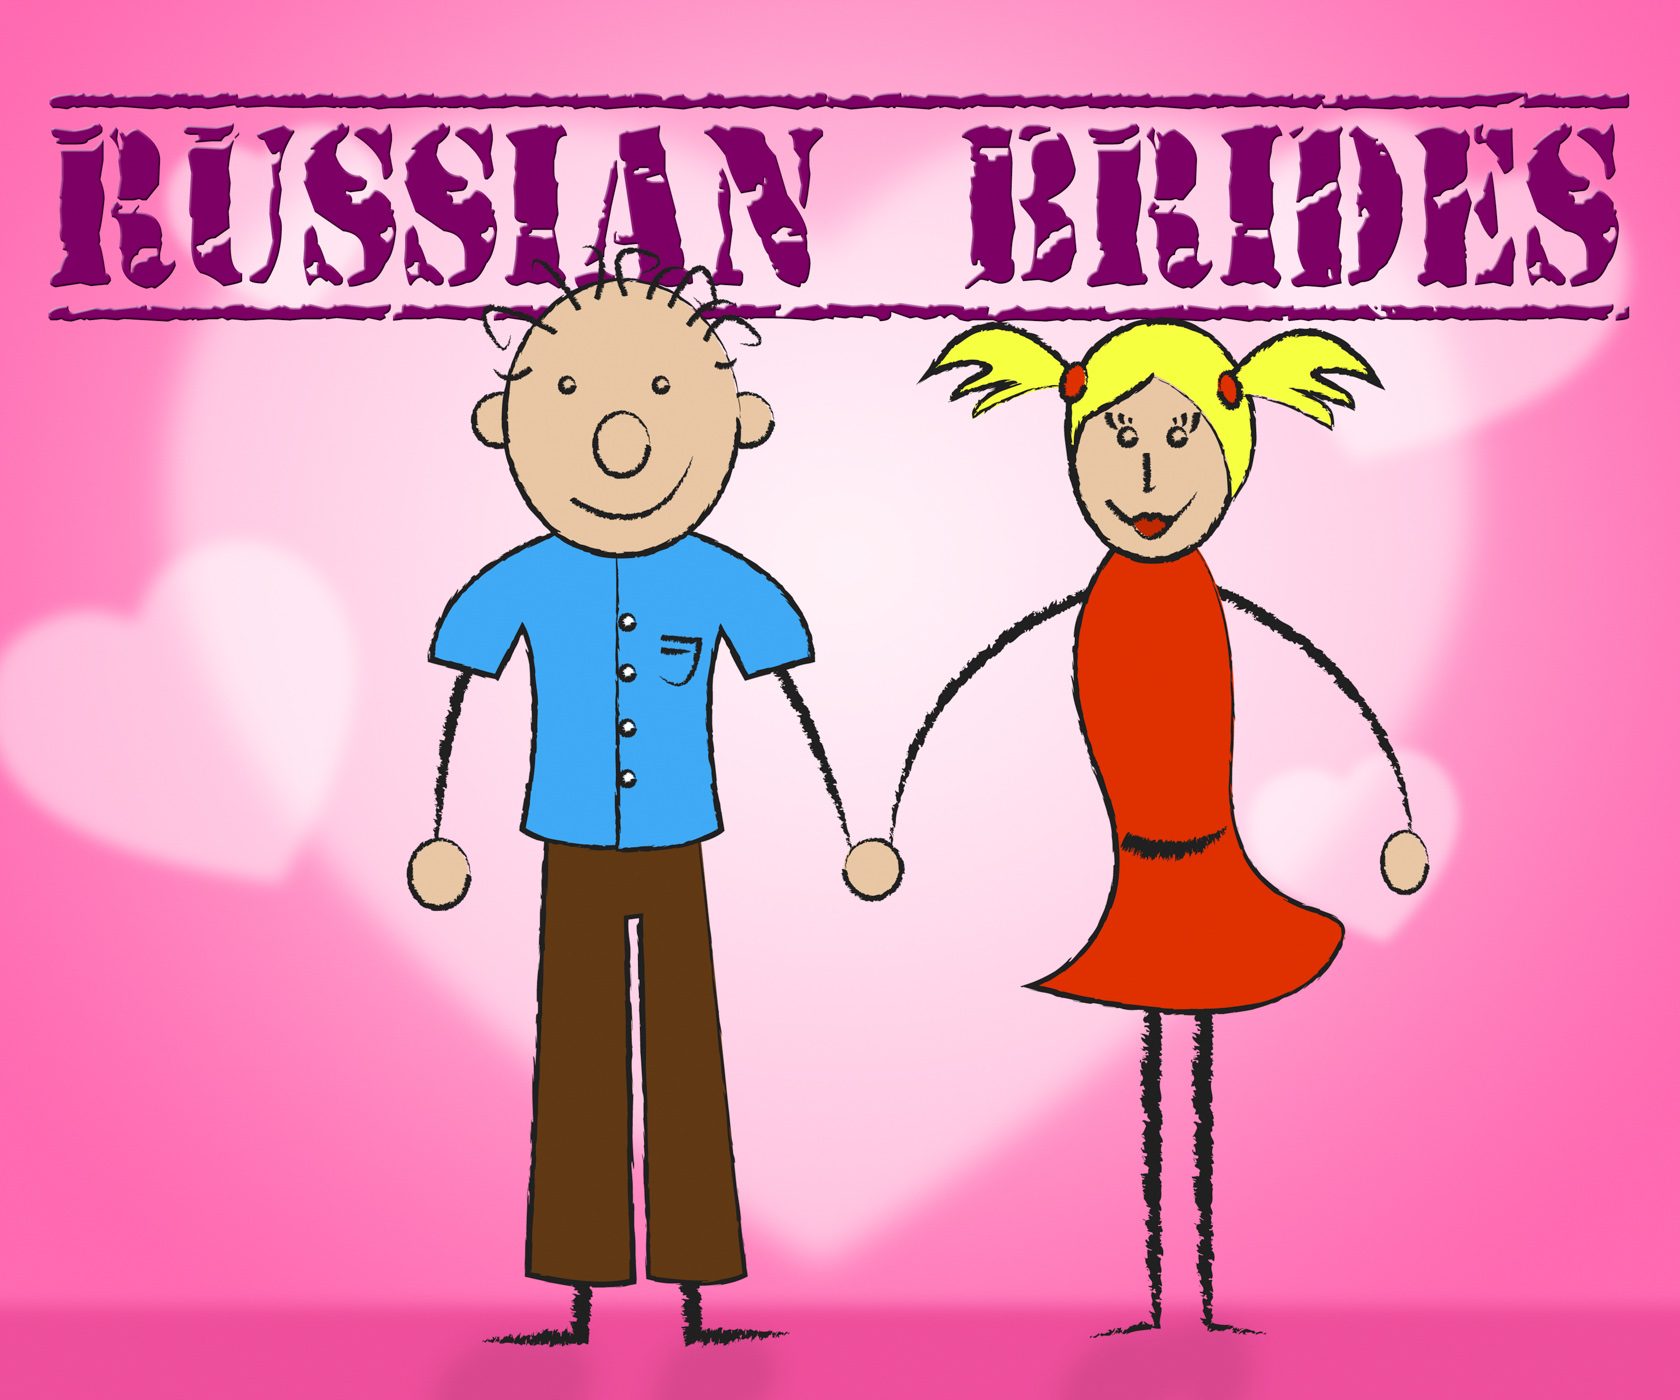 Russian brides means wife find and marry photo